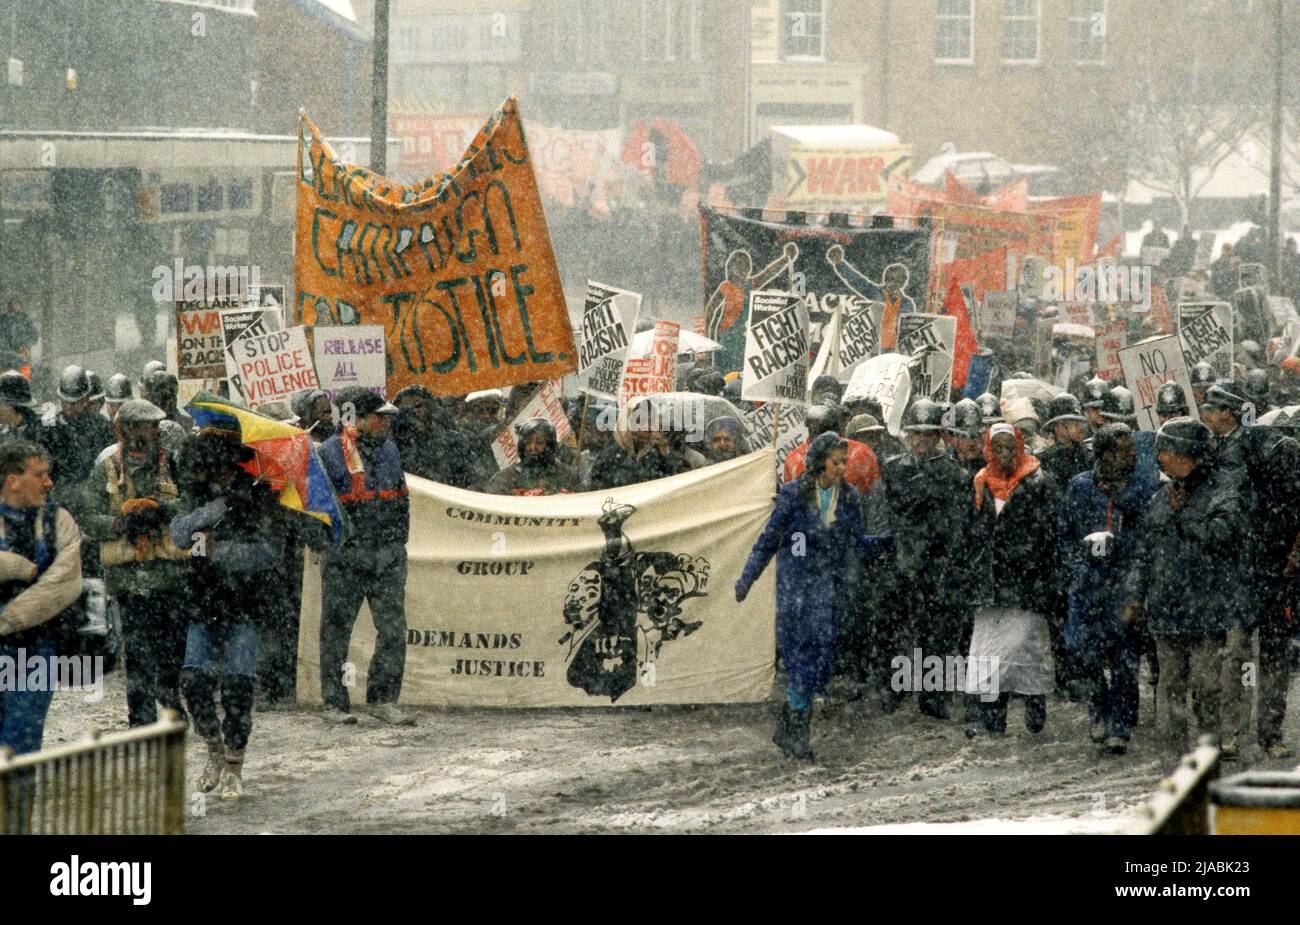 Protest in snow storm march following the death of Clinton McCurbin who died while being arrested by the police. March 7th 1987, Wolverhampton, West Midlands, Uk Stock Photo